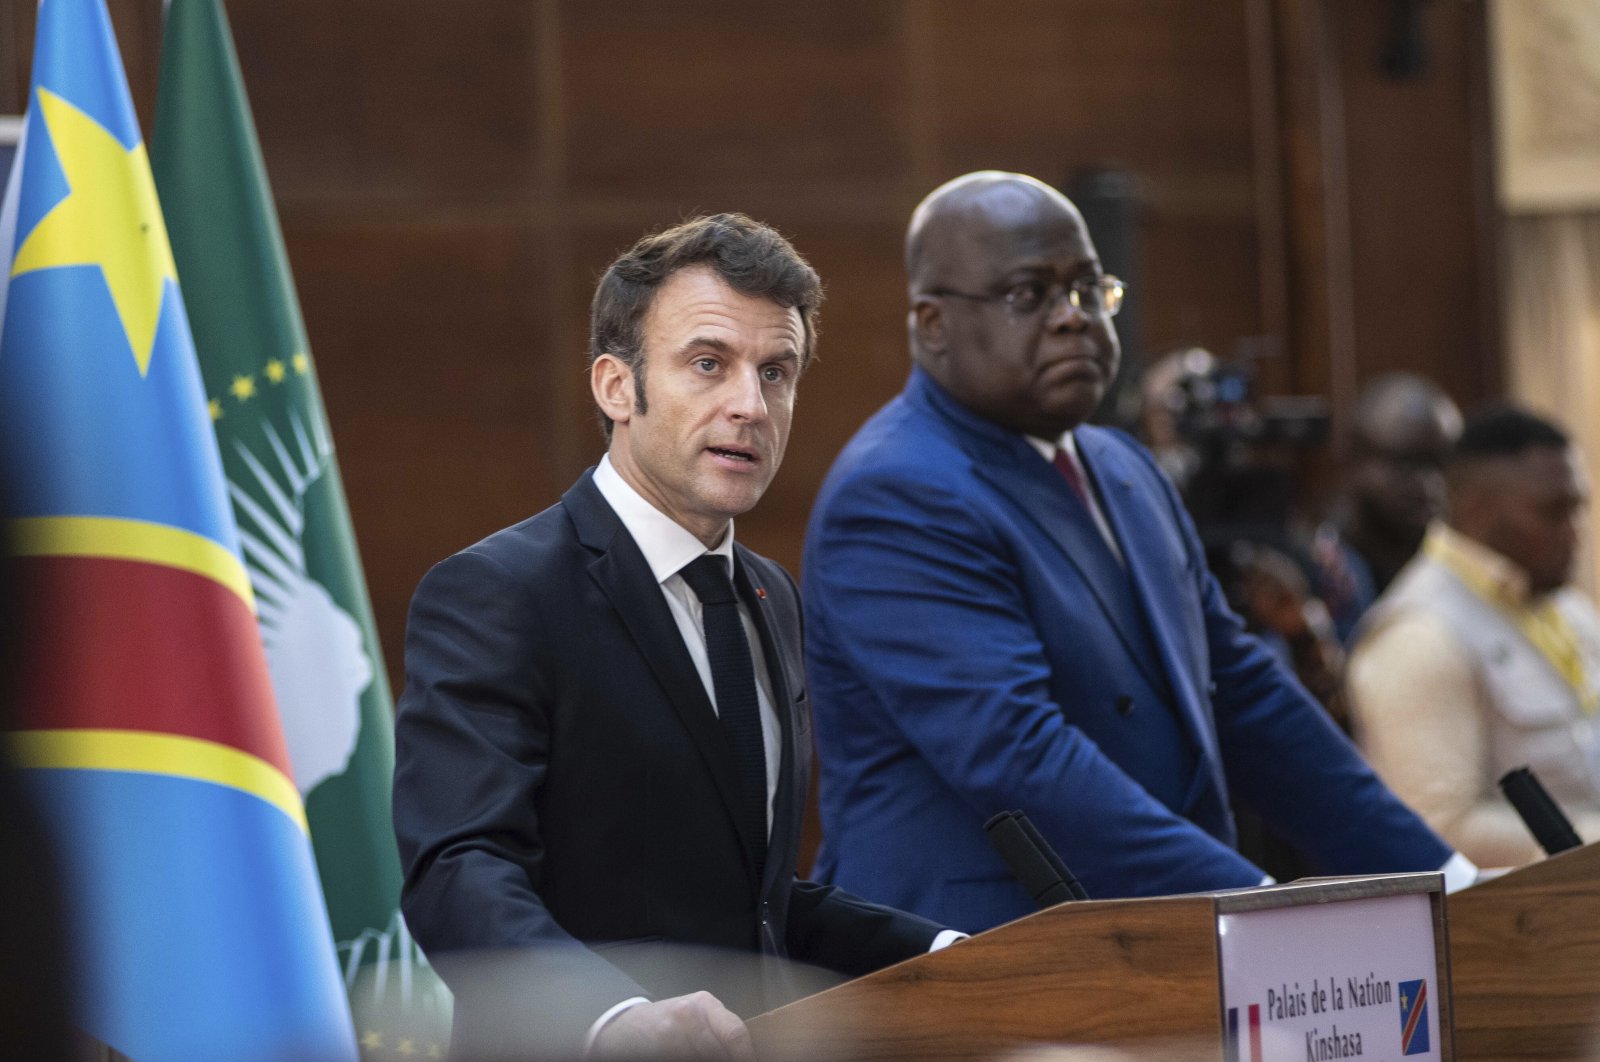 French President Emmanuel Macron (L) adresses media during a joint news conference with Democratic Republic of the Congo President Felix Tshisekedi in Kinshasa, Democratic Republic of Congo, March 4, 2023. (AP Photo)